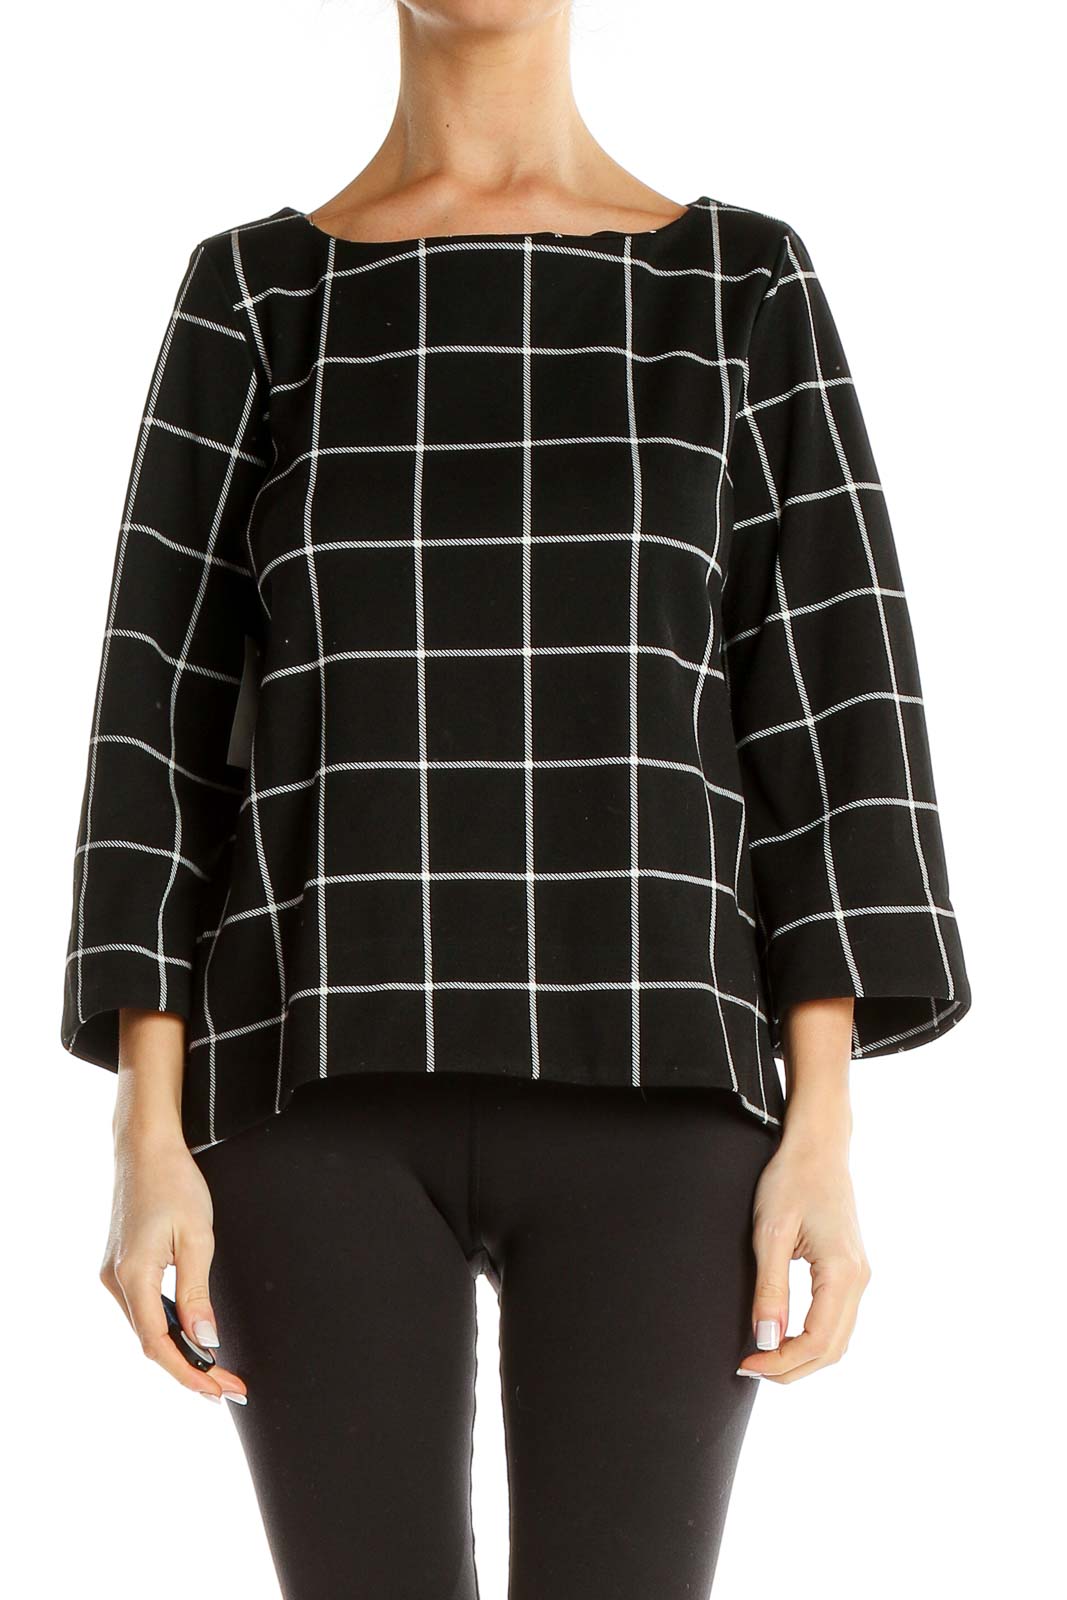 Black Checkered All Day Wear Top Front